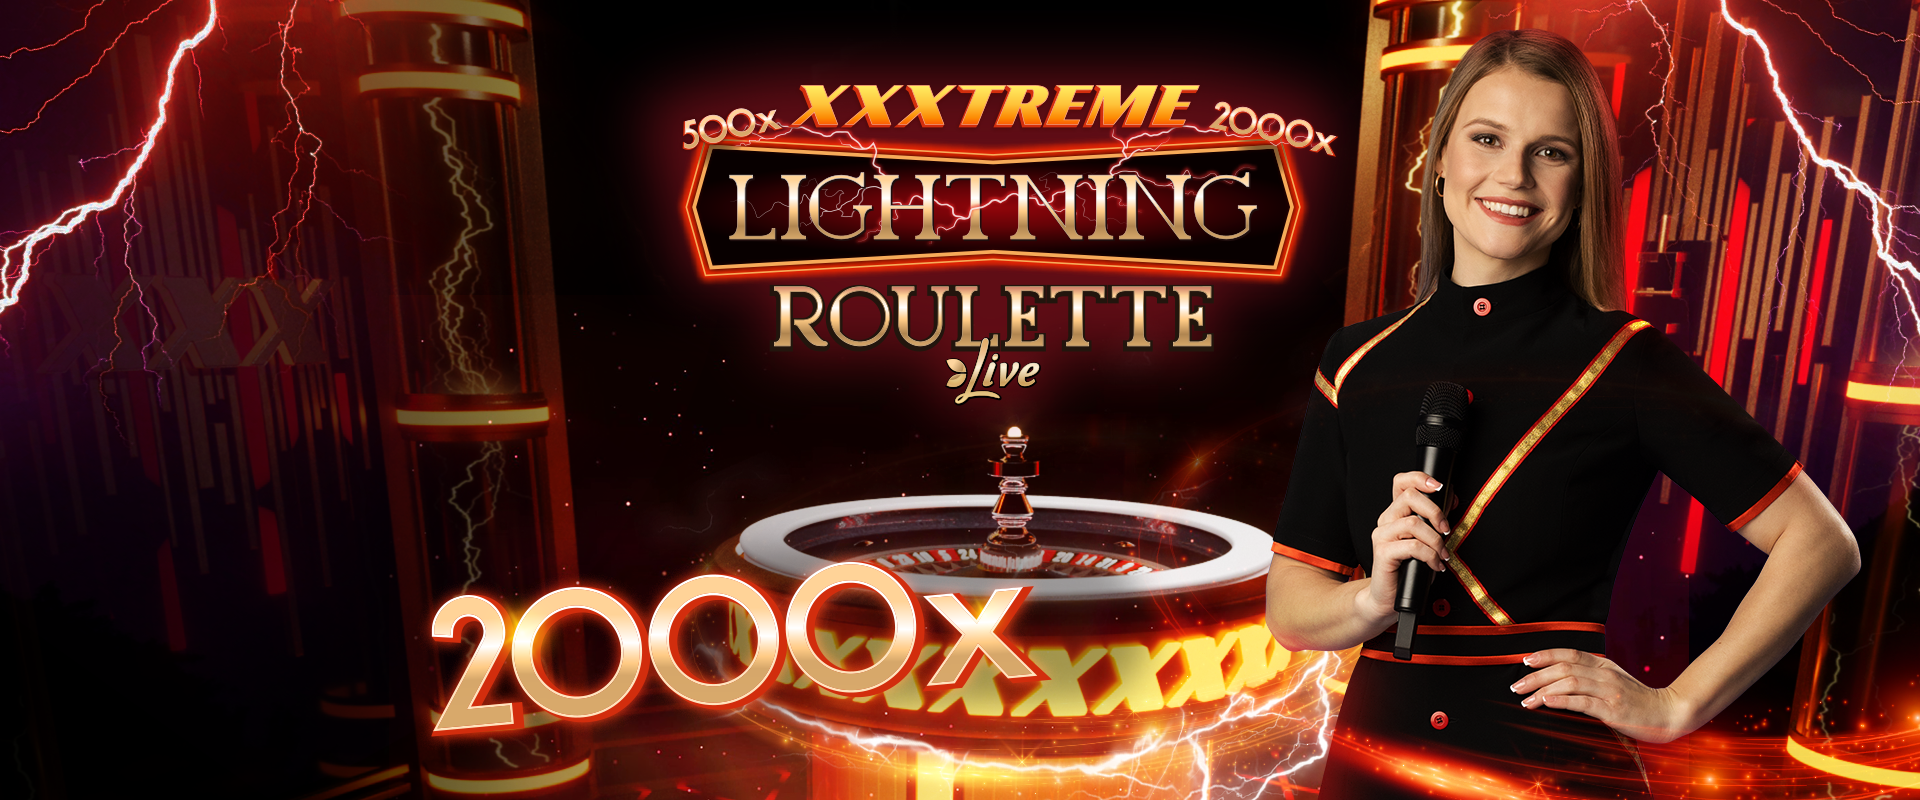 The Live Casino Game XXXtreme Lightning Roulette from Evolution